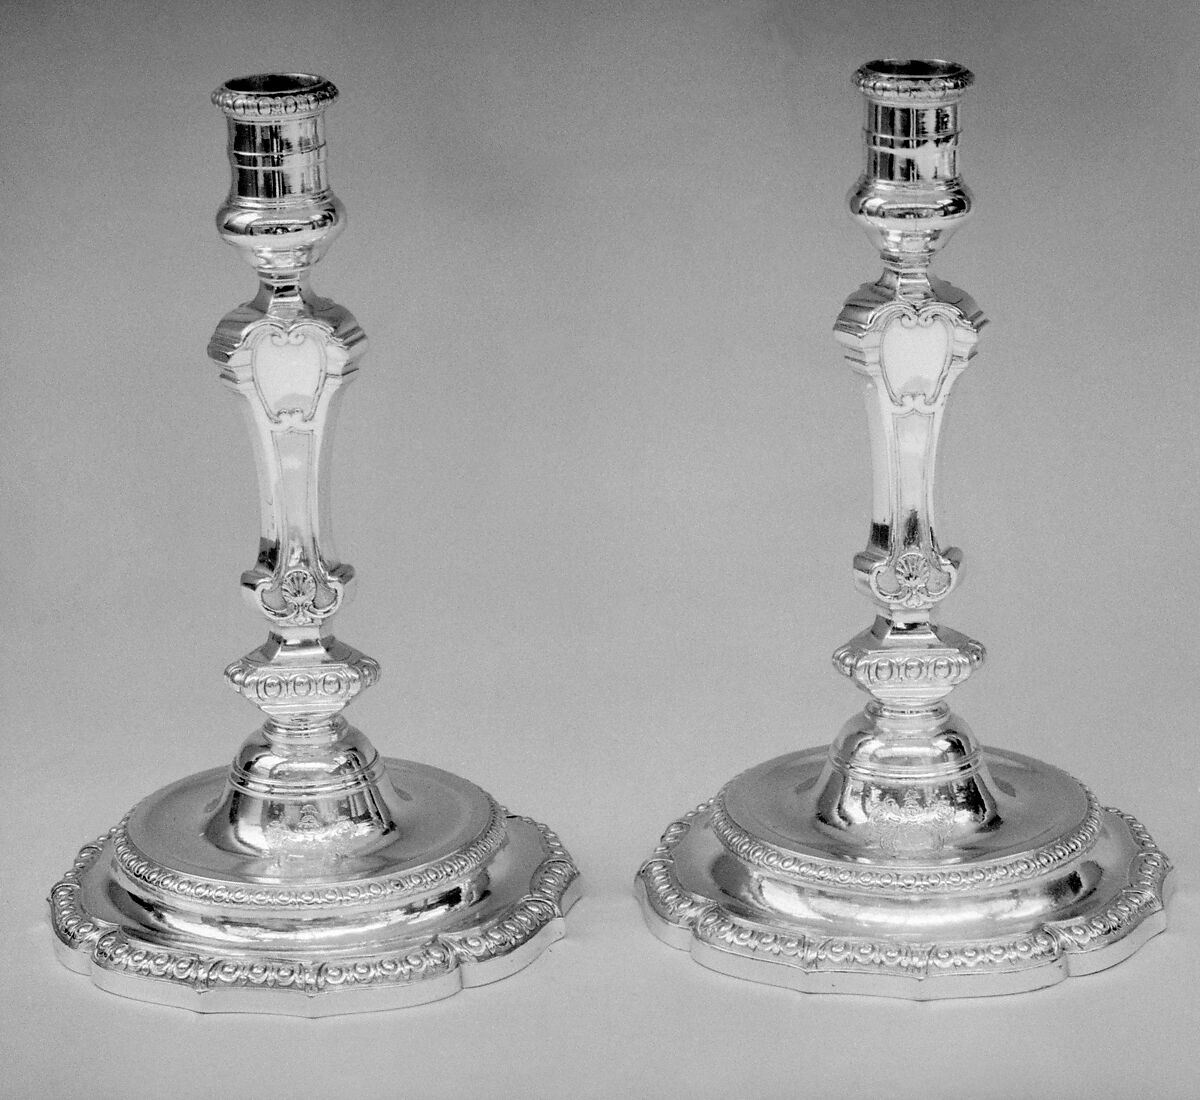 Pair of candlesticks, Gilles-Claude Gouel (master 1727, died 1769), Silver, French, Paris 